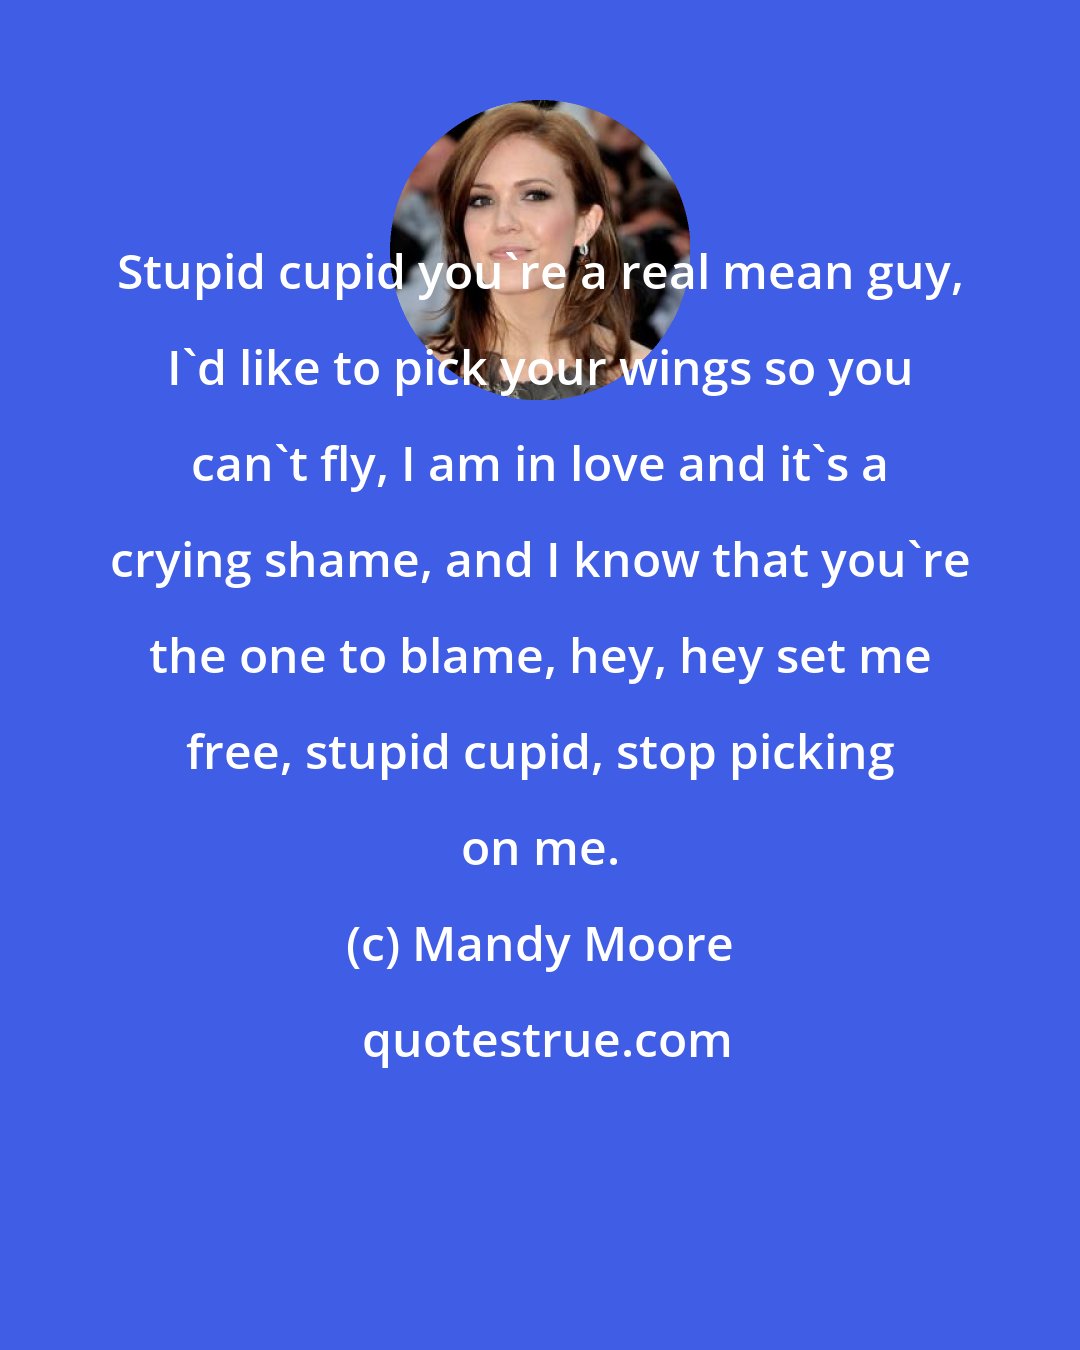 Mandy Moore: Stupid cupid you're a real mean guy, I'd like to pick your wings so you can't fly, I am in love and it's a crying shame, and I know that you're the one to blame, hey, hey set me free, stupid cupid, stop picking on me.